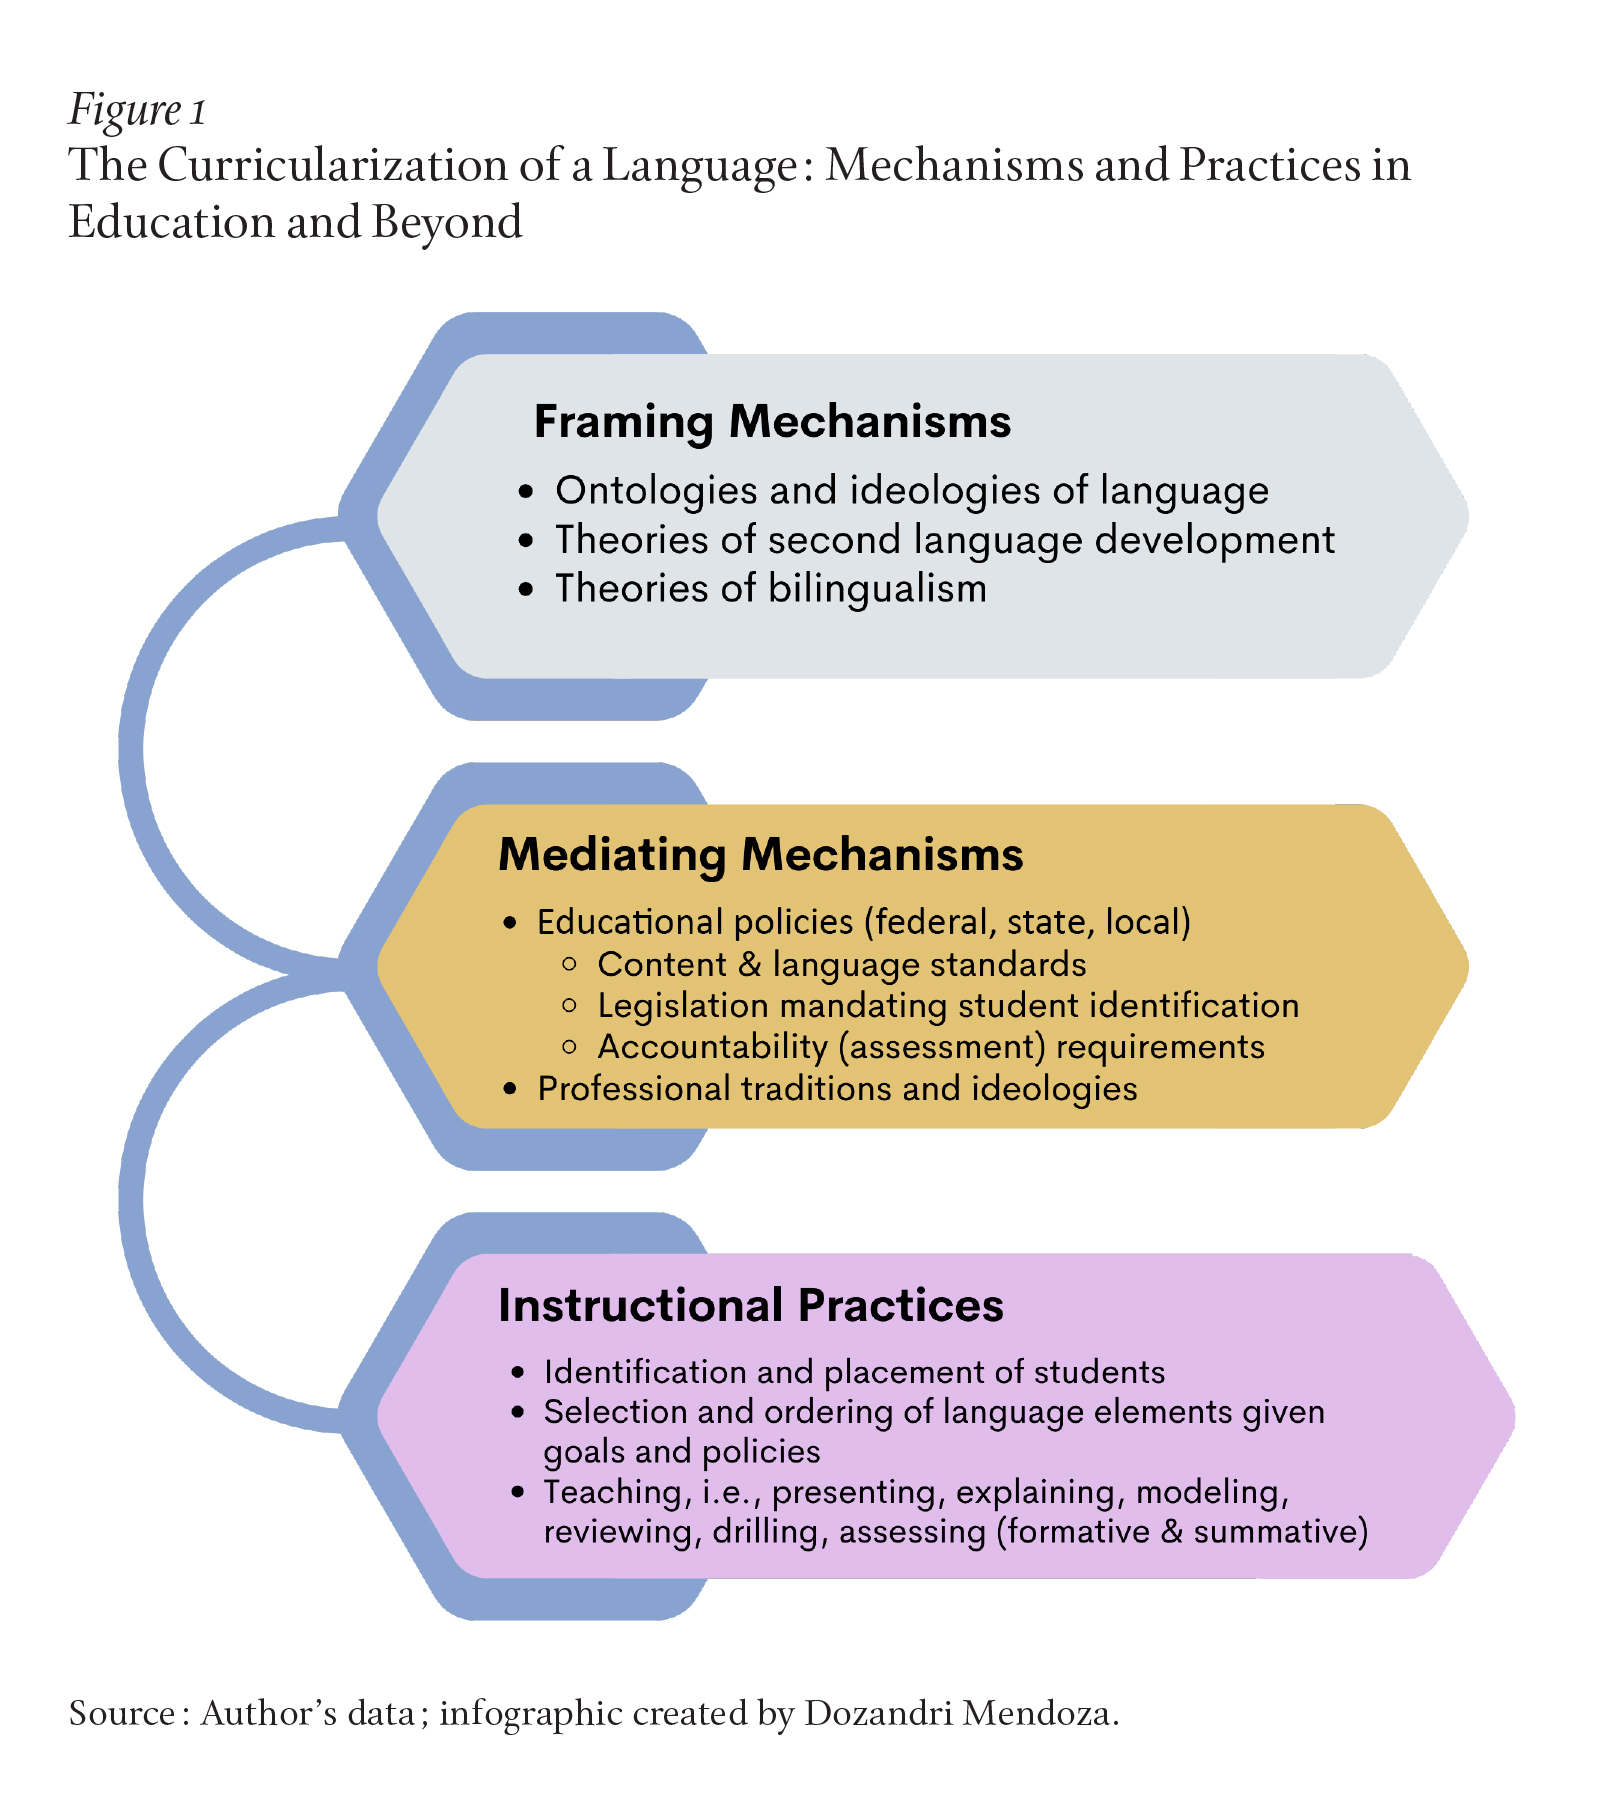 A chart that shows the relationship between framing mechanisms (ontologies, ideologies, and theories of language), mediating mechanisms (educational policies as well as traditions upheld across professions), and instructional practices (identification and placement of language students, teaching methods and processes such as explaining, modeling, and drilling lessons) in language education..